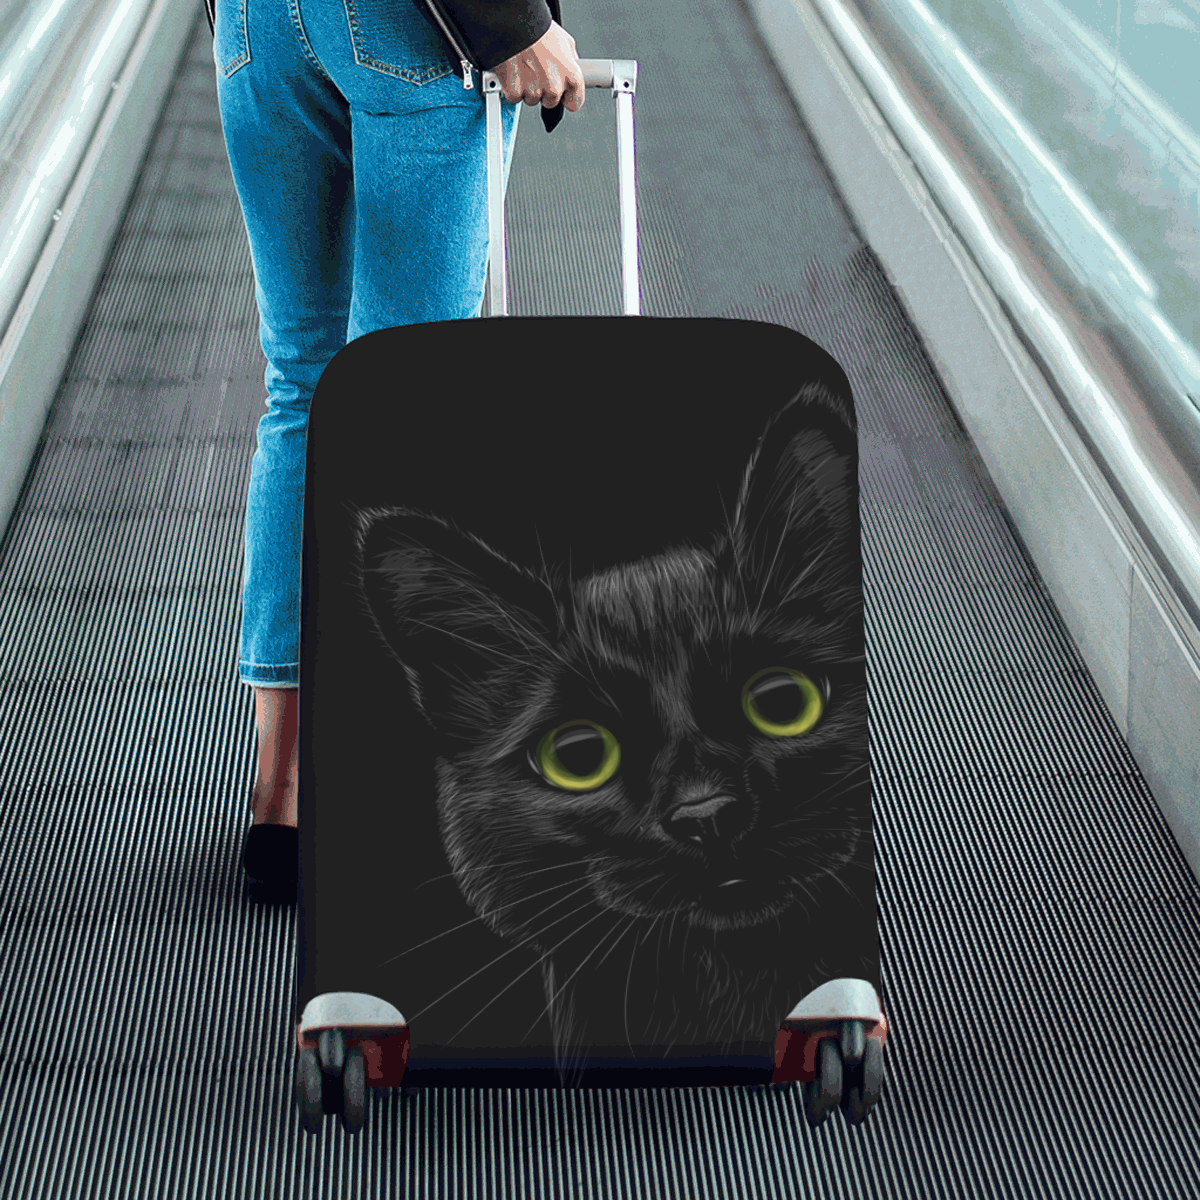 Black Cat Luggage Cover/Large 26"-28"